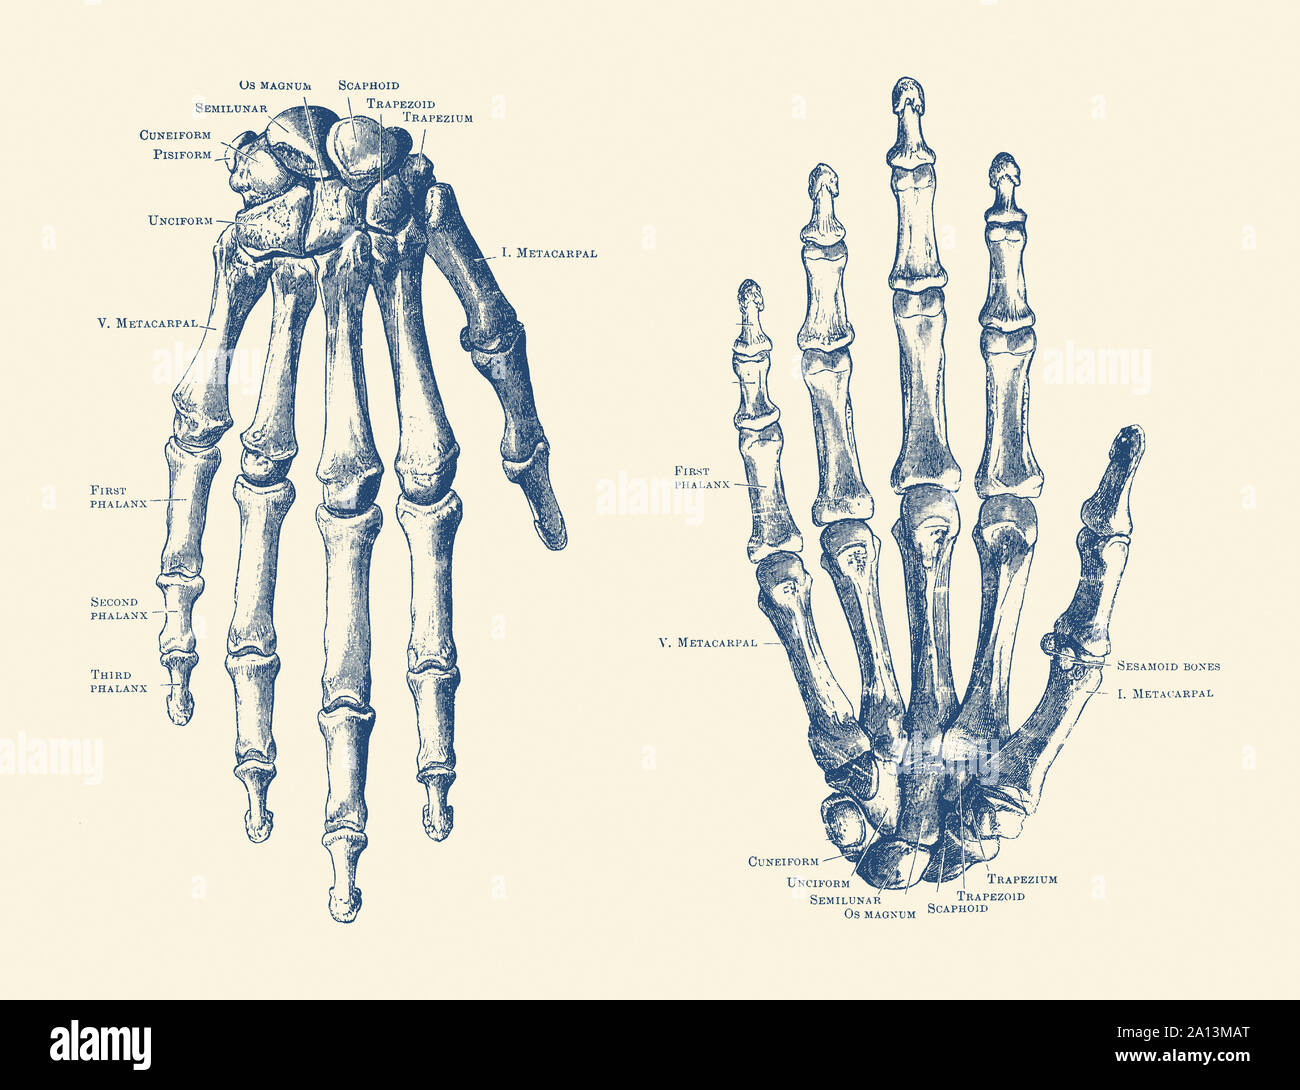 Vintage anatomy print features the hand of a human skeleton with bones labeled. Stock Photo